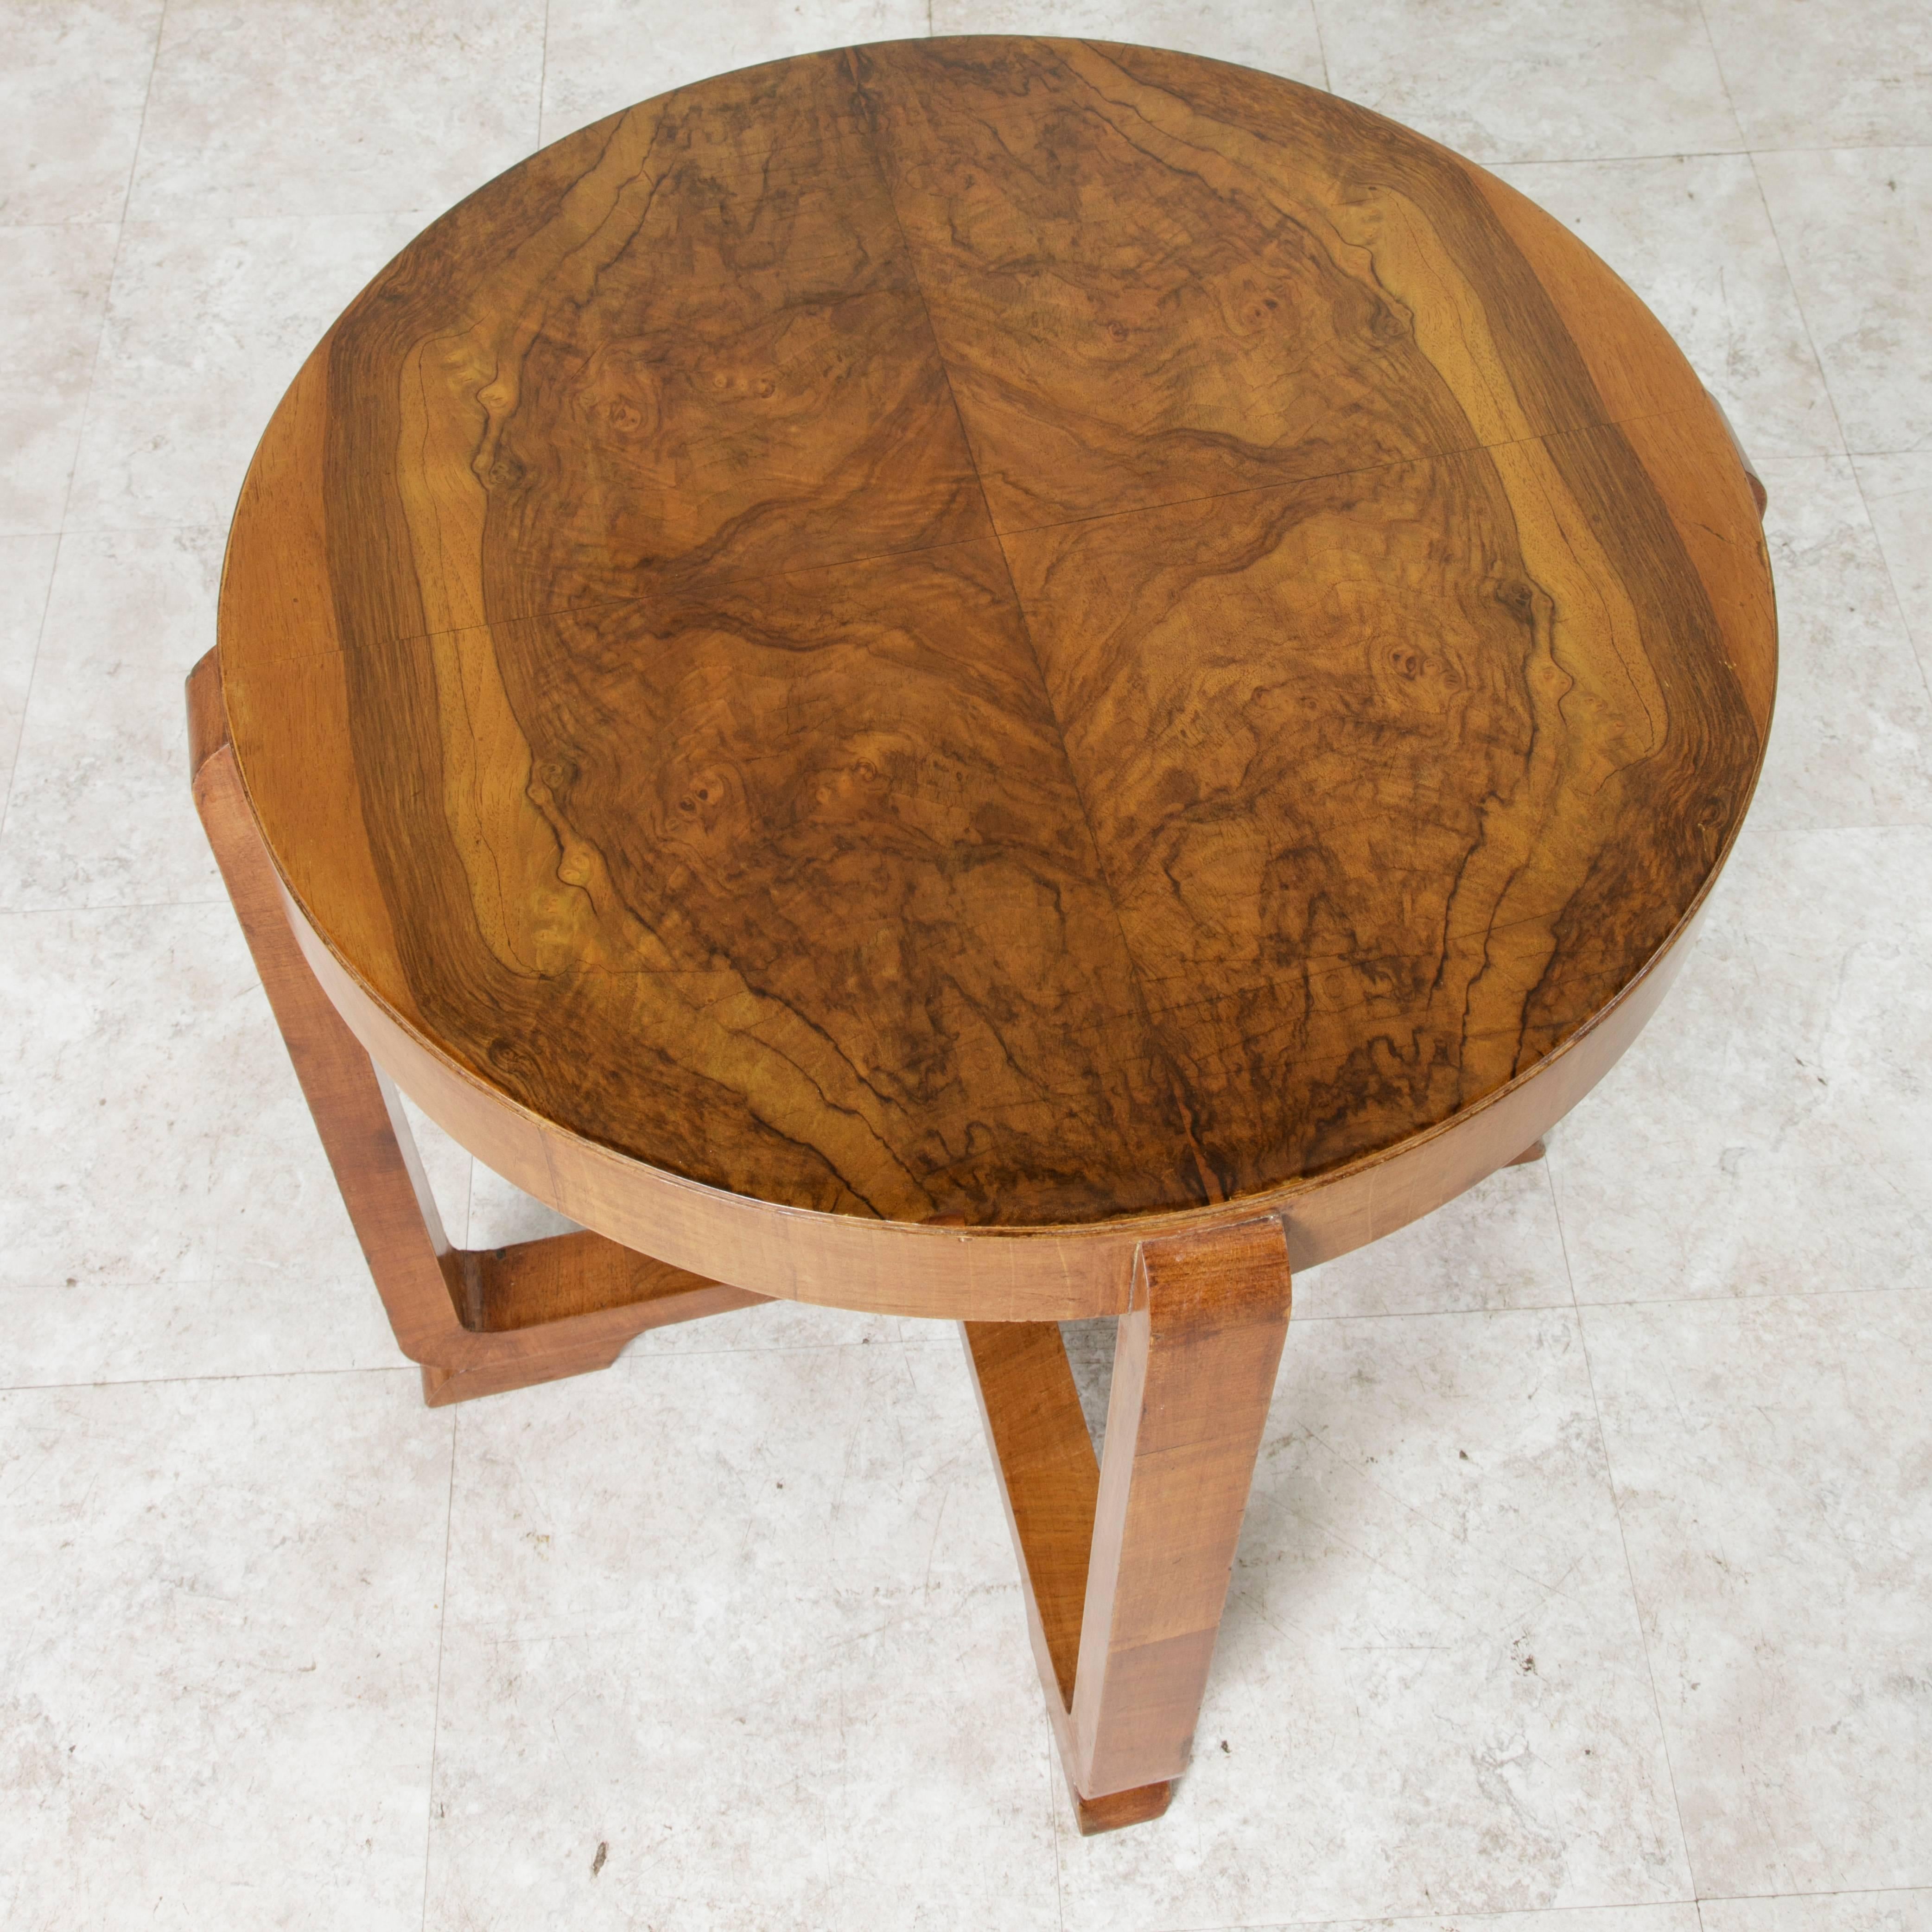 With simple lines that allow for appreciation of the magnificent bookmatched burl walnut top, this French Art Deco period side table is finely finished with a French polish. An exceptional piece to lend its chic style beside a chair or as a cocktail